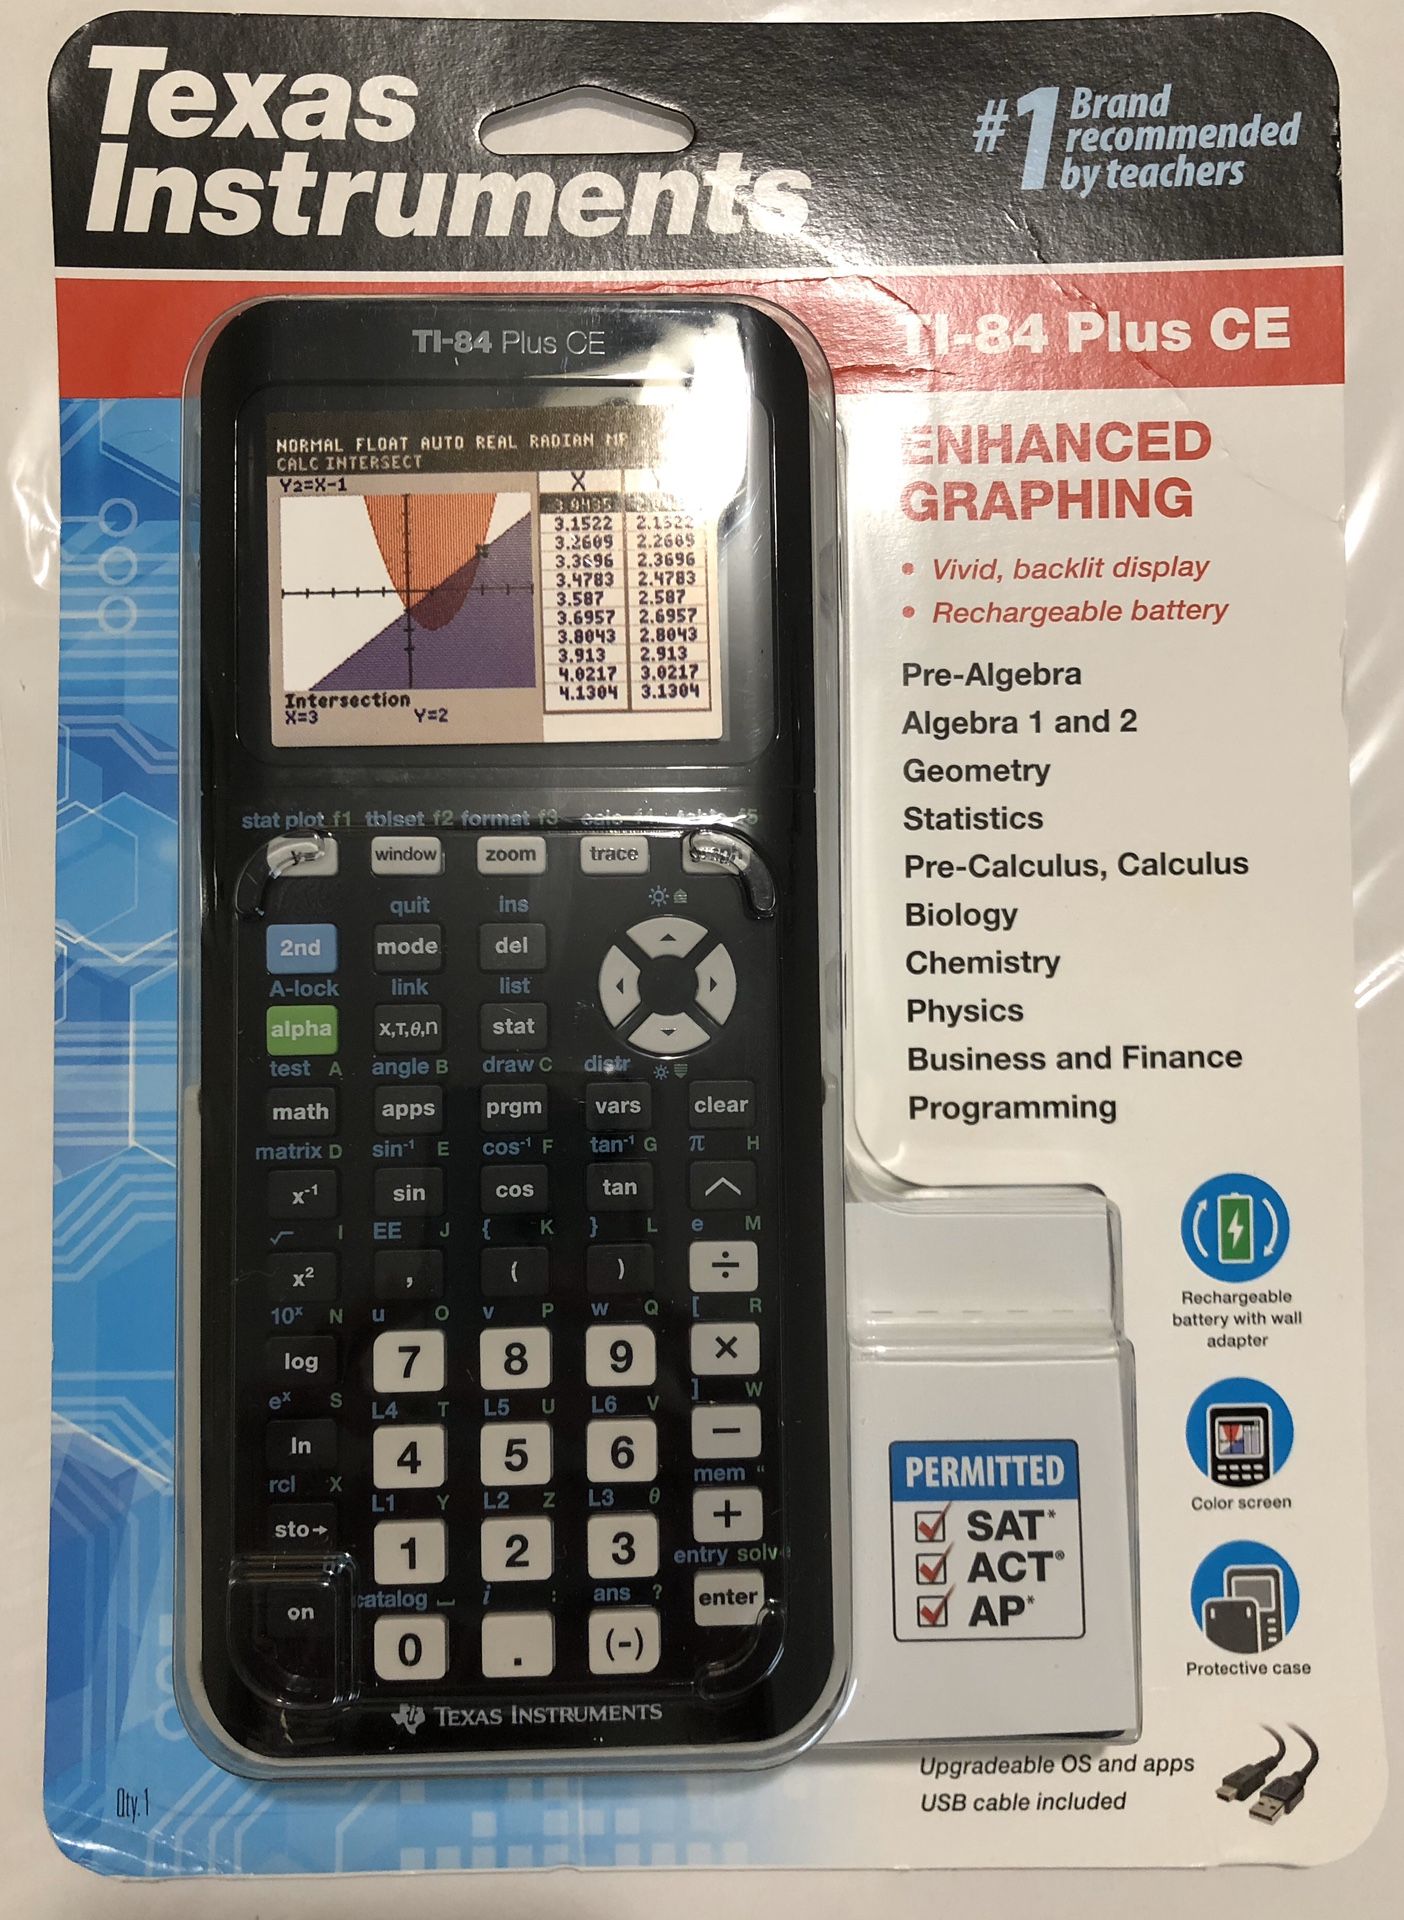 BRAND NEW! Texas Instruments TI-84 Plus CE Graphing Calculator, Black